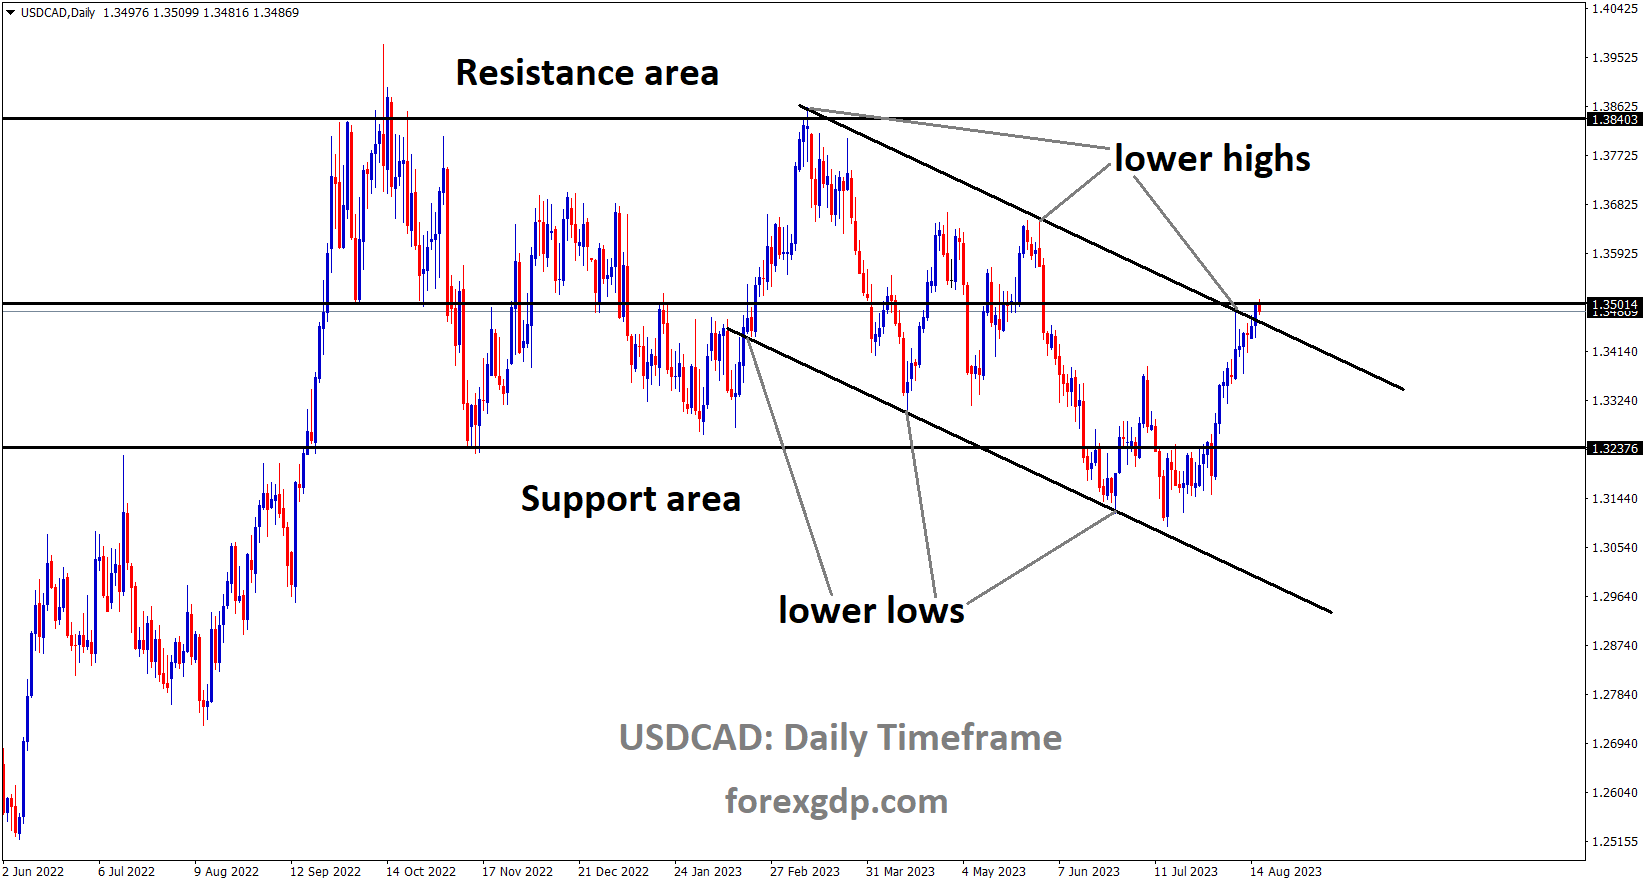 USDCAD is moving in the Descending channel and the market has reached the lower high area of the channel